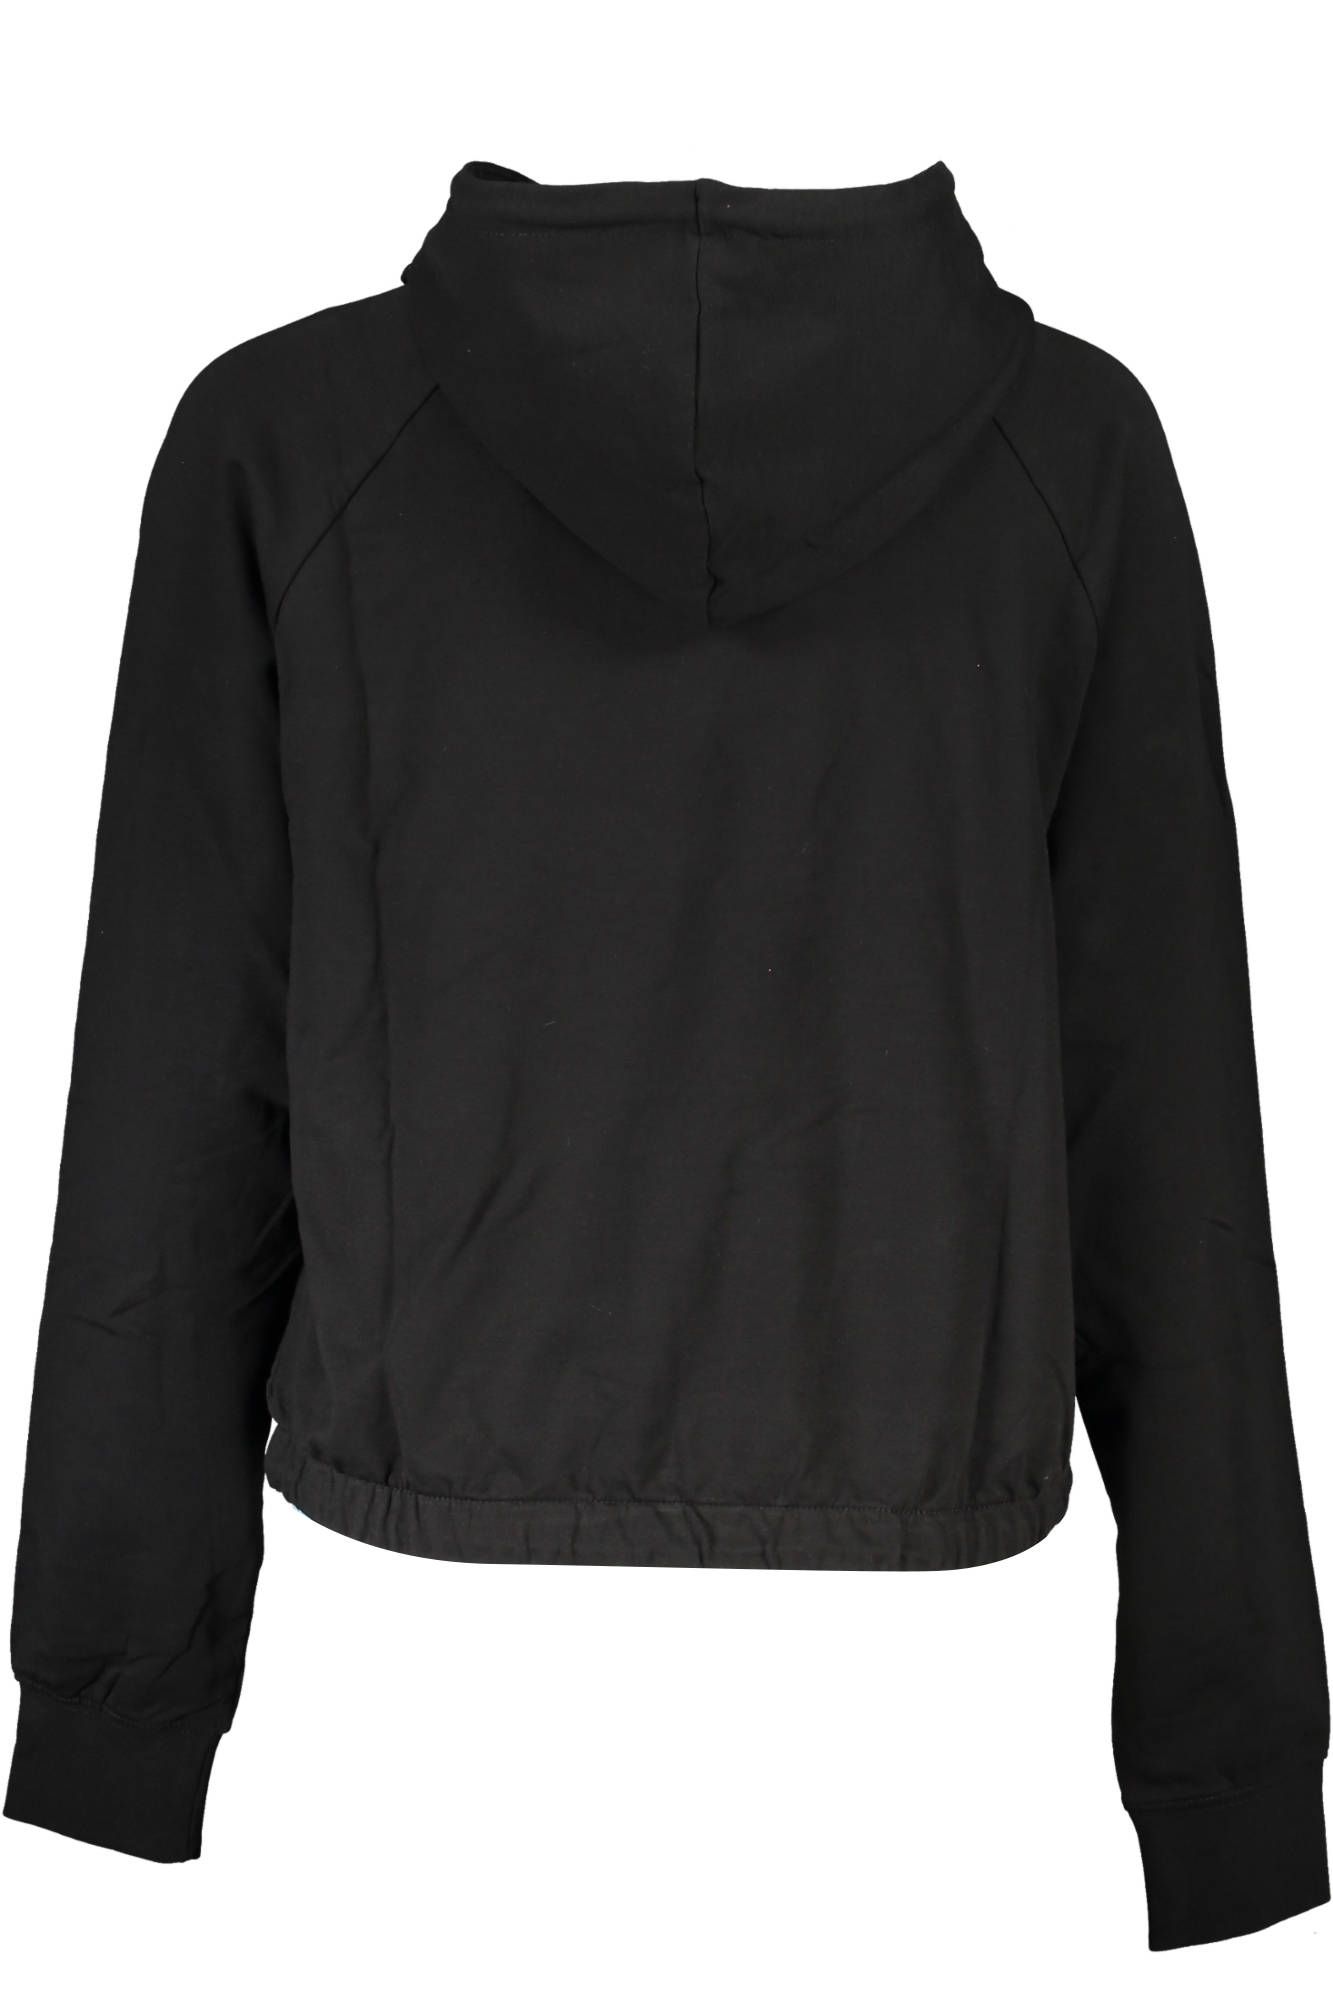 Cotton Hooded Black Sweater